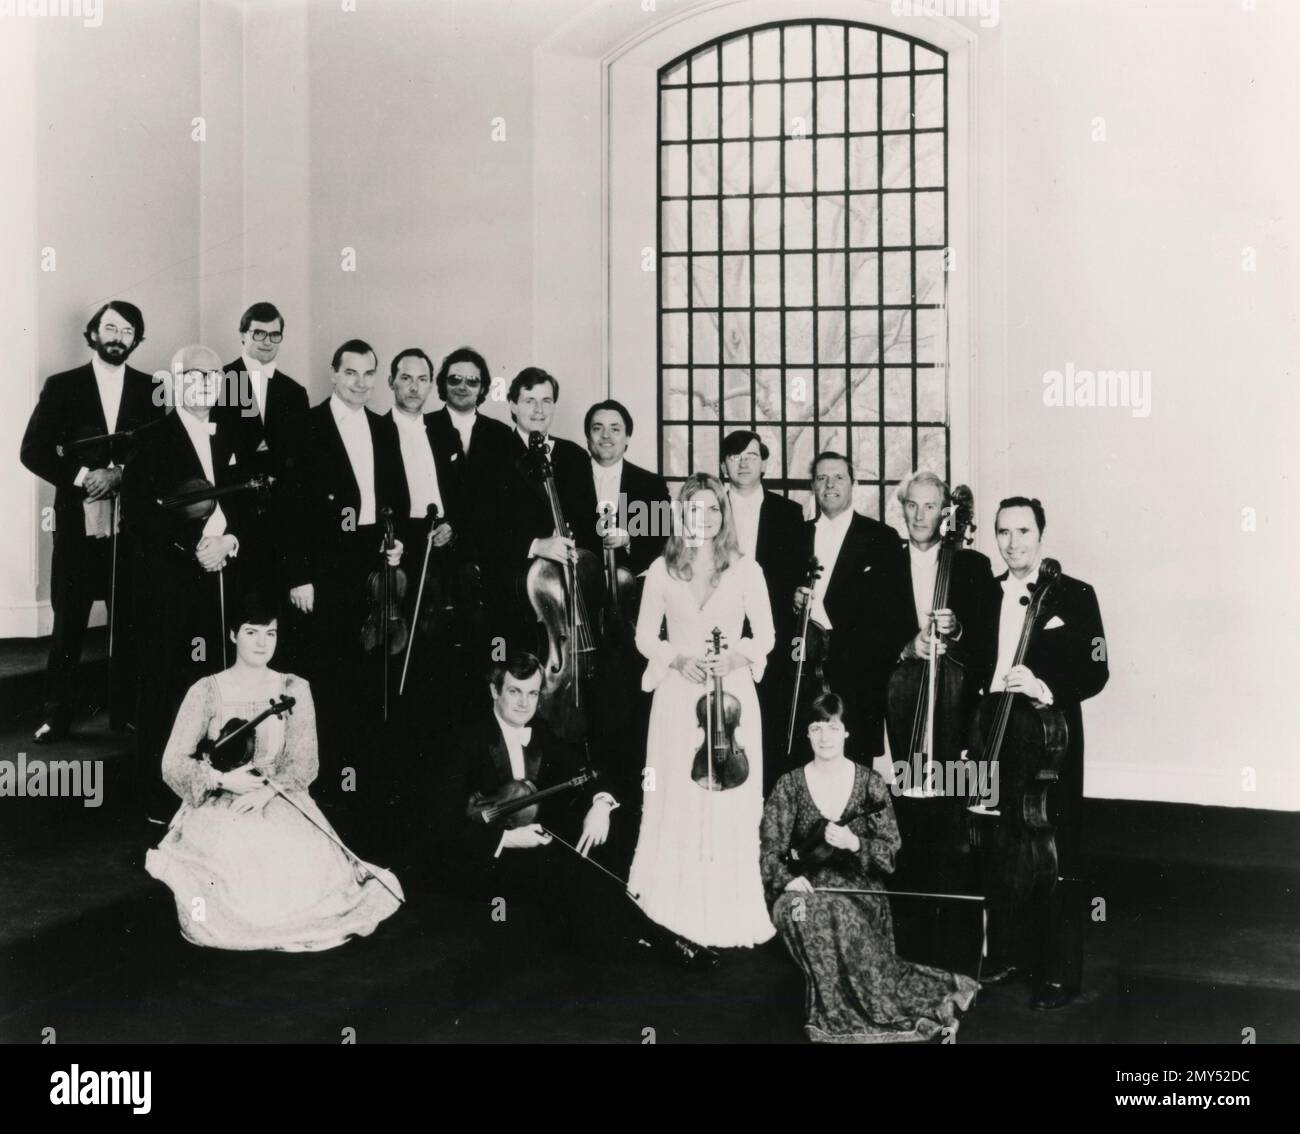 The chamber ensemble of the Academy of St-Martin's-in-the-Fields, London, UK 1980s Stock Photo